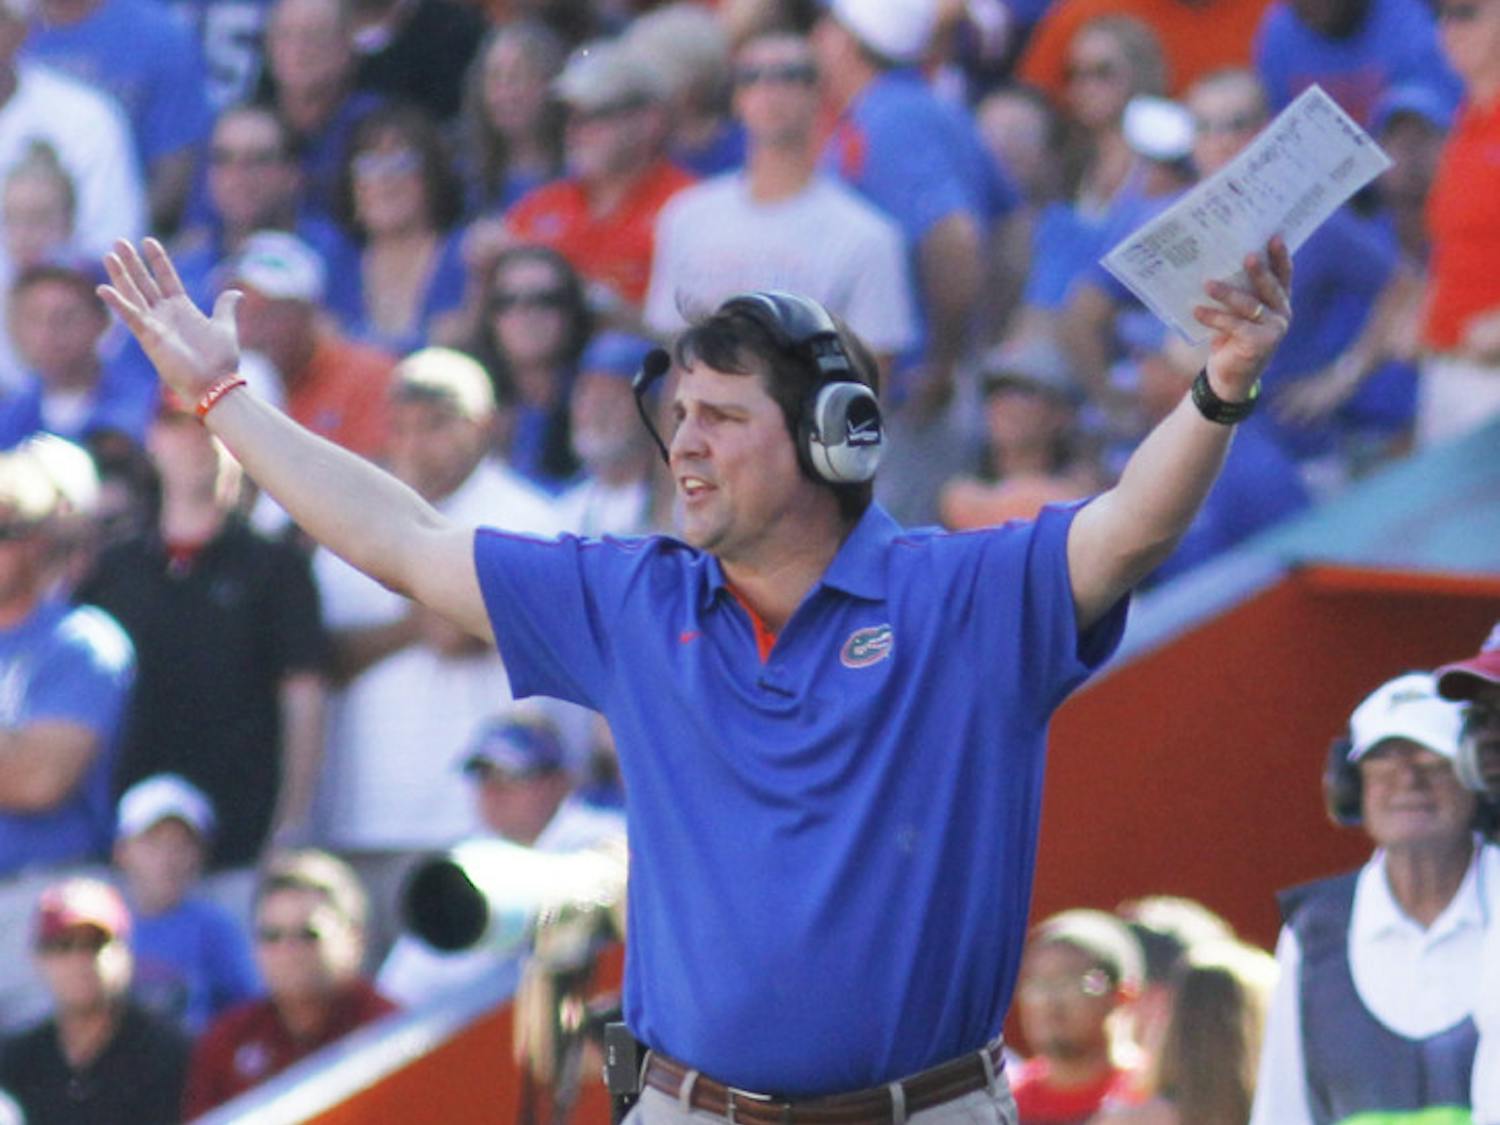 Coach Will Muschamp reacts to a call during UF’s 44-11 win against South Carolina on Saturday in The Swamp.
